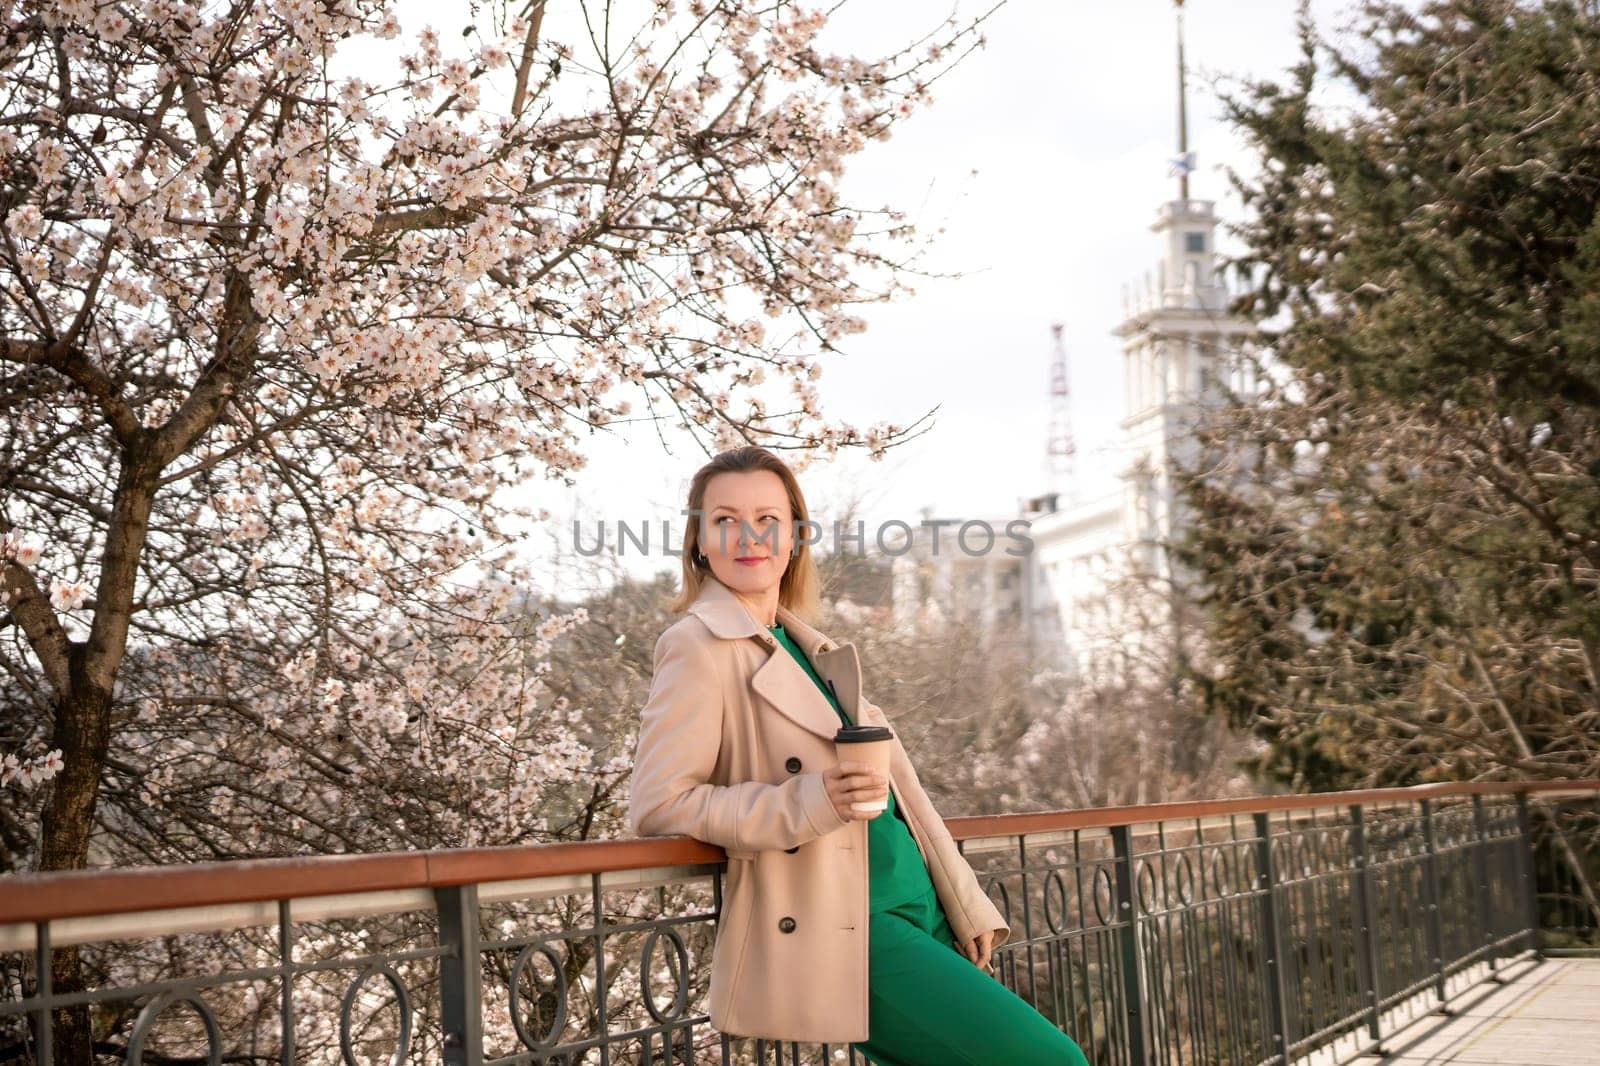 A woman is standing on a ledge with a cup of coffee in her hand. She is wearing sunglasses and a tan coat. The scene is set in a park with cherry blossoms in bloom. The woman is enjoying the view. by Matiunina